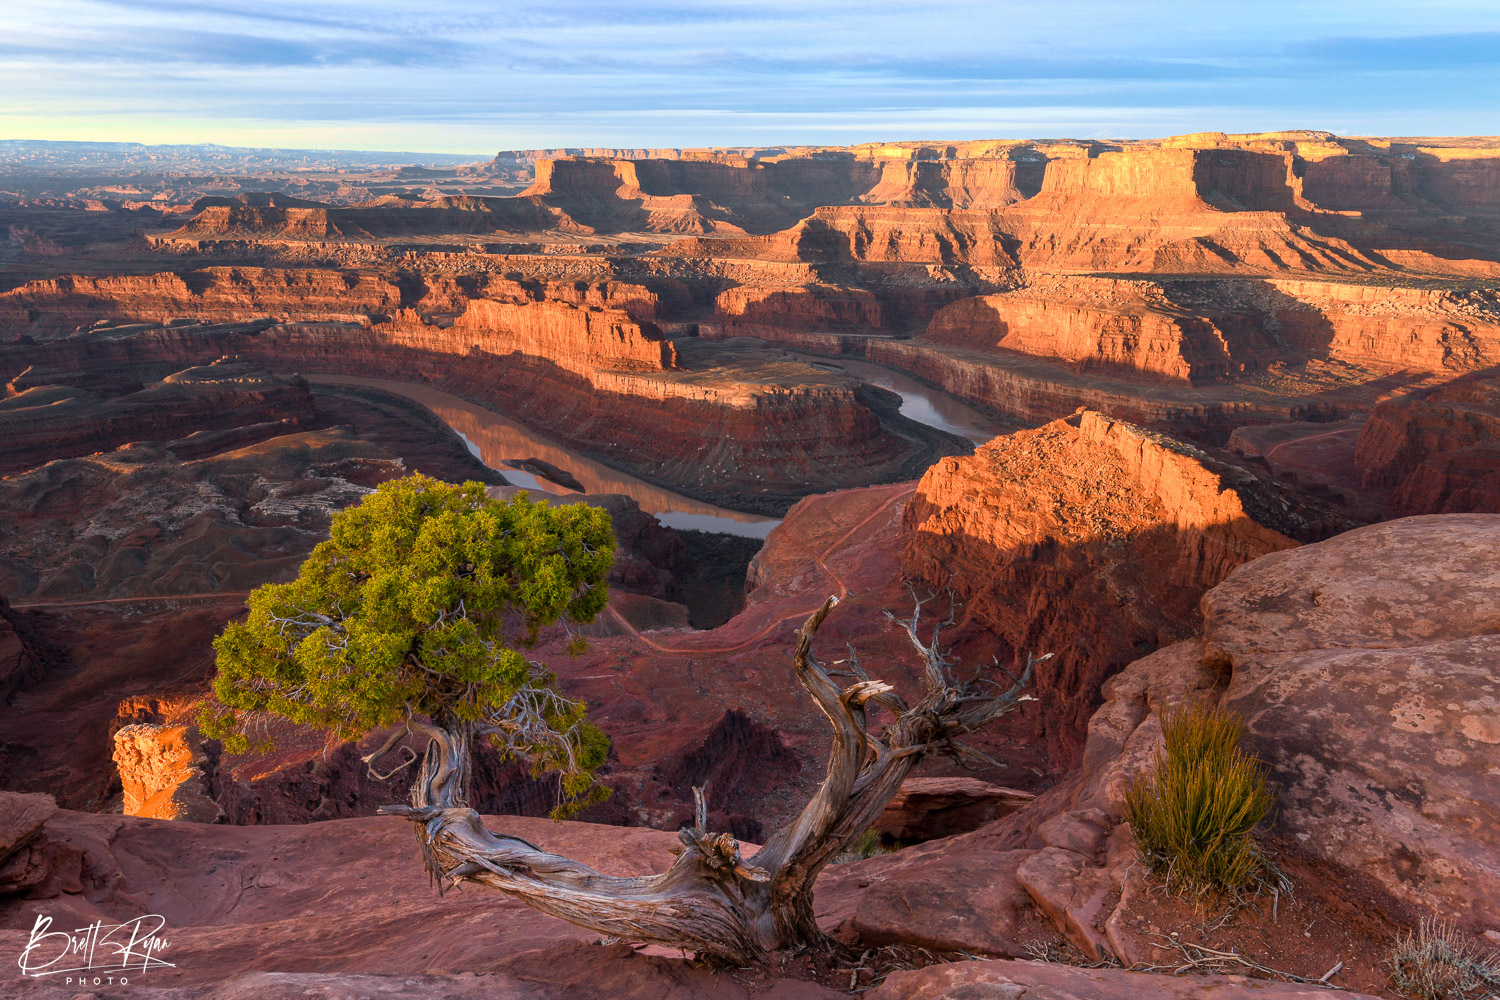 Image taken during sunrise at Dead Horse Point State Park. Limited Edition Print of 100.